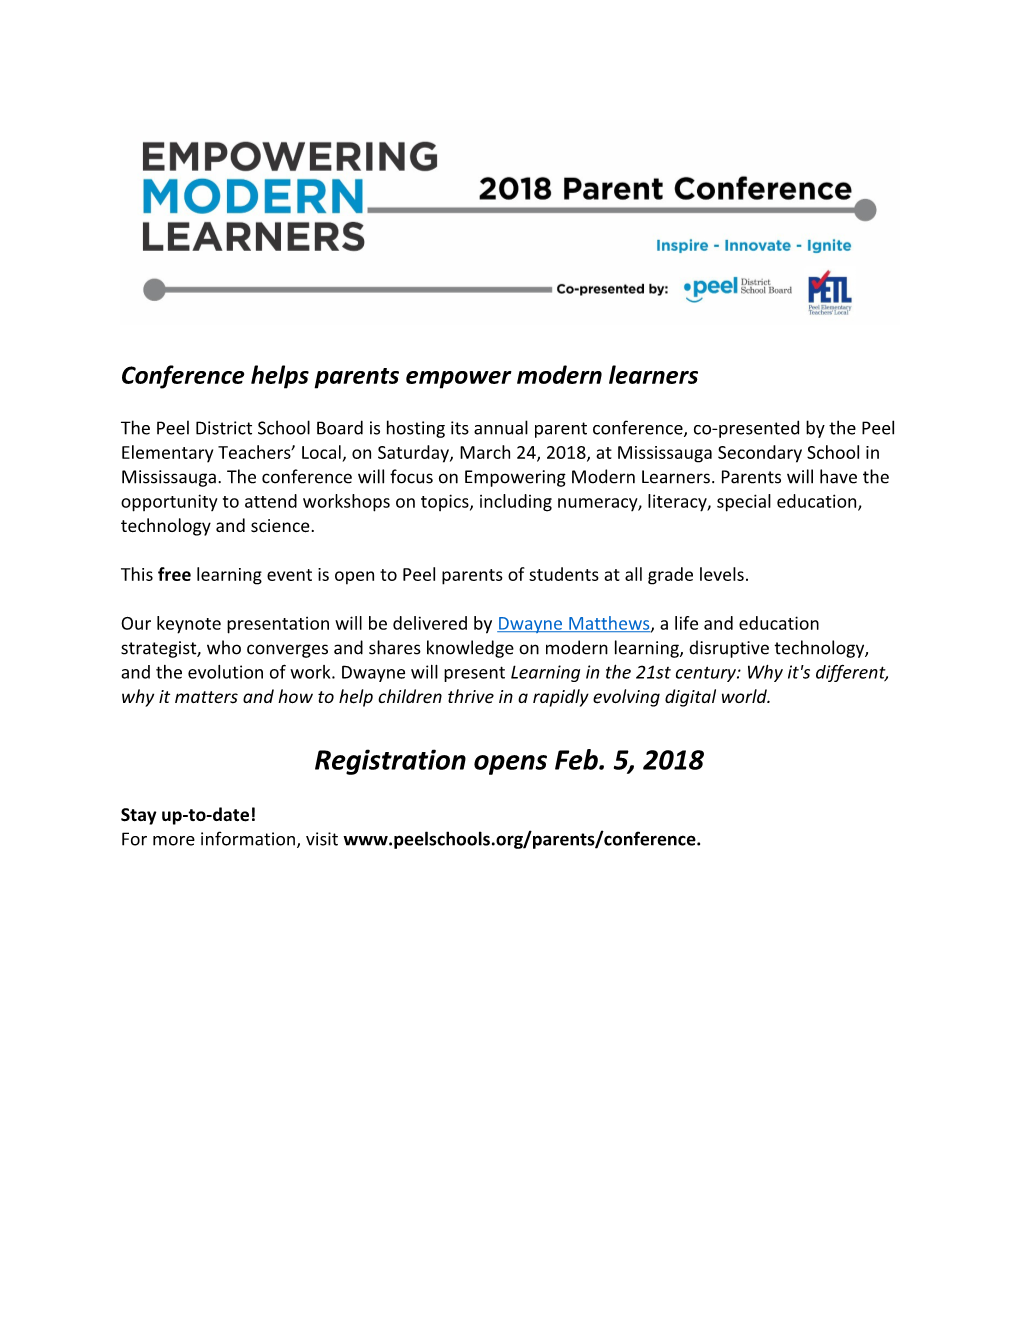 Conference Helps Parents Empower Modern Learners